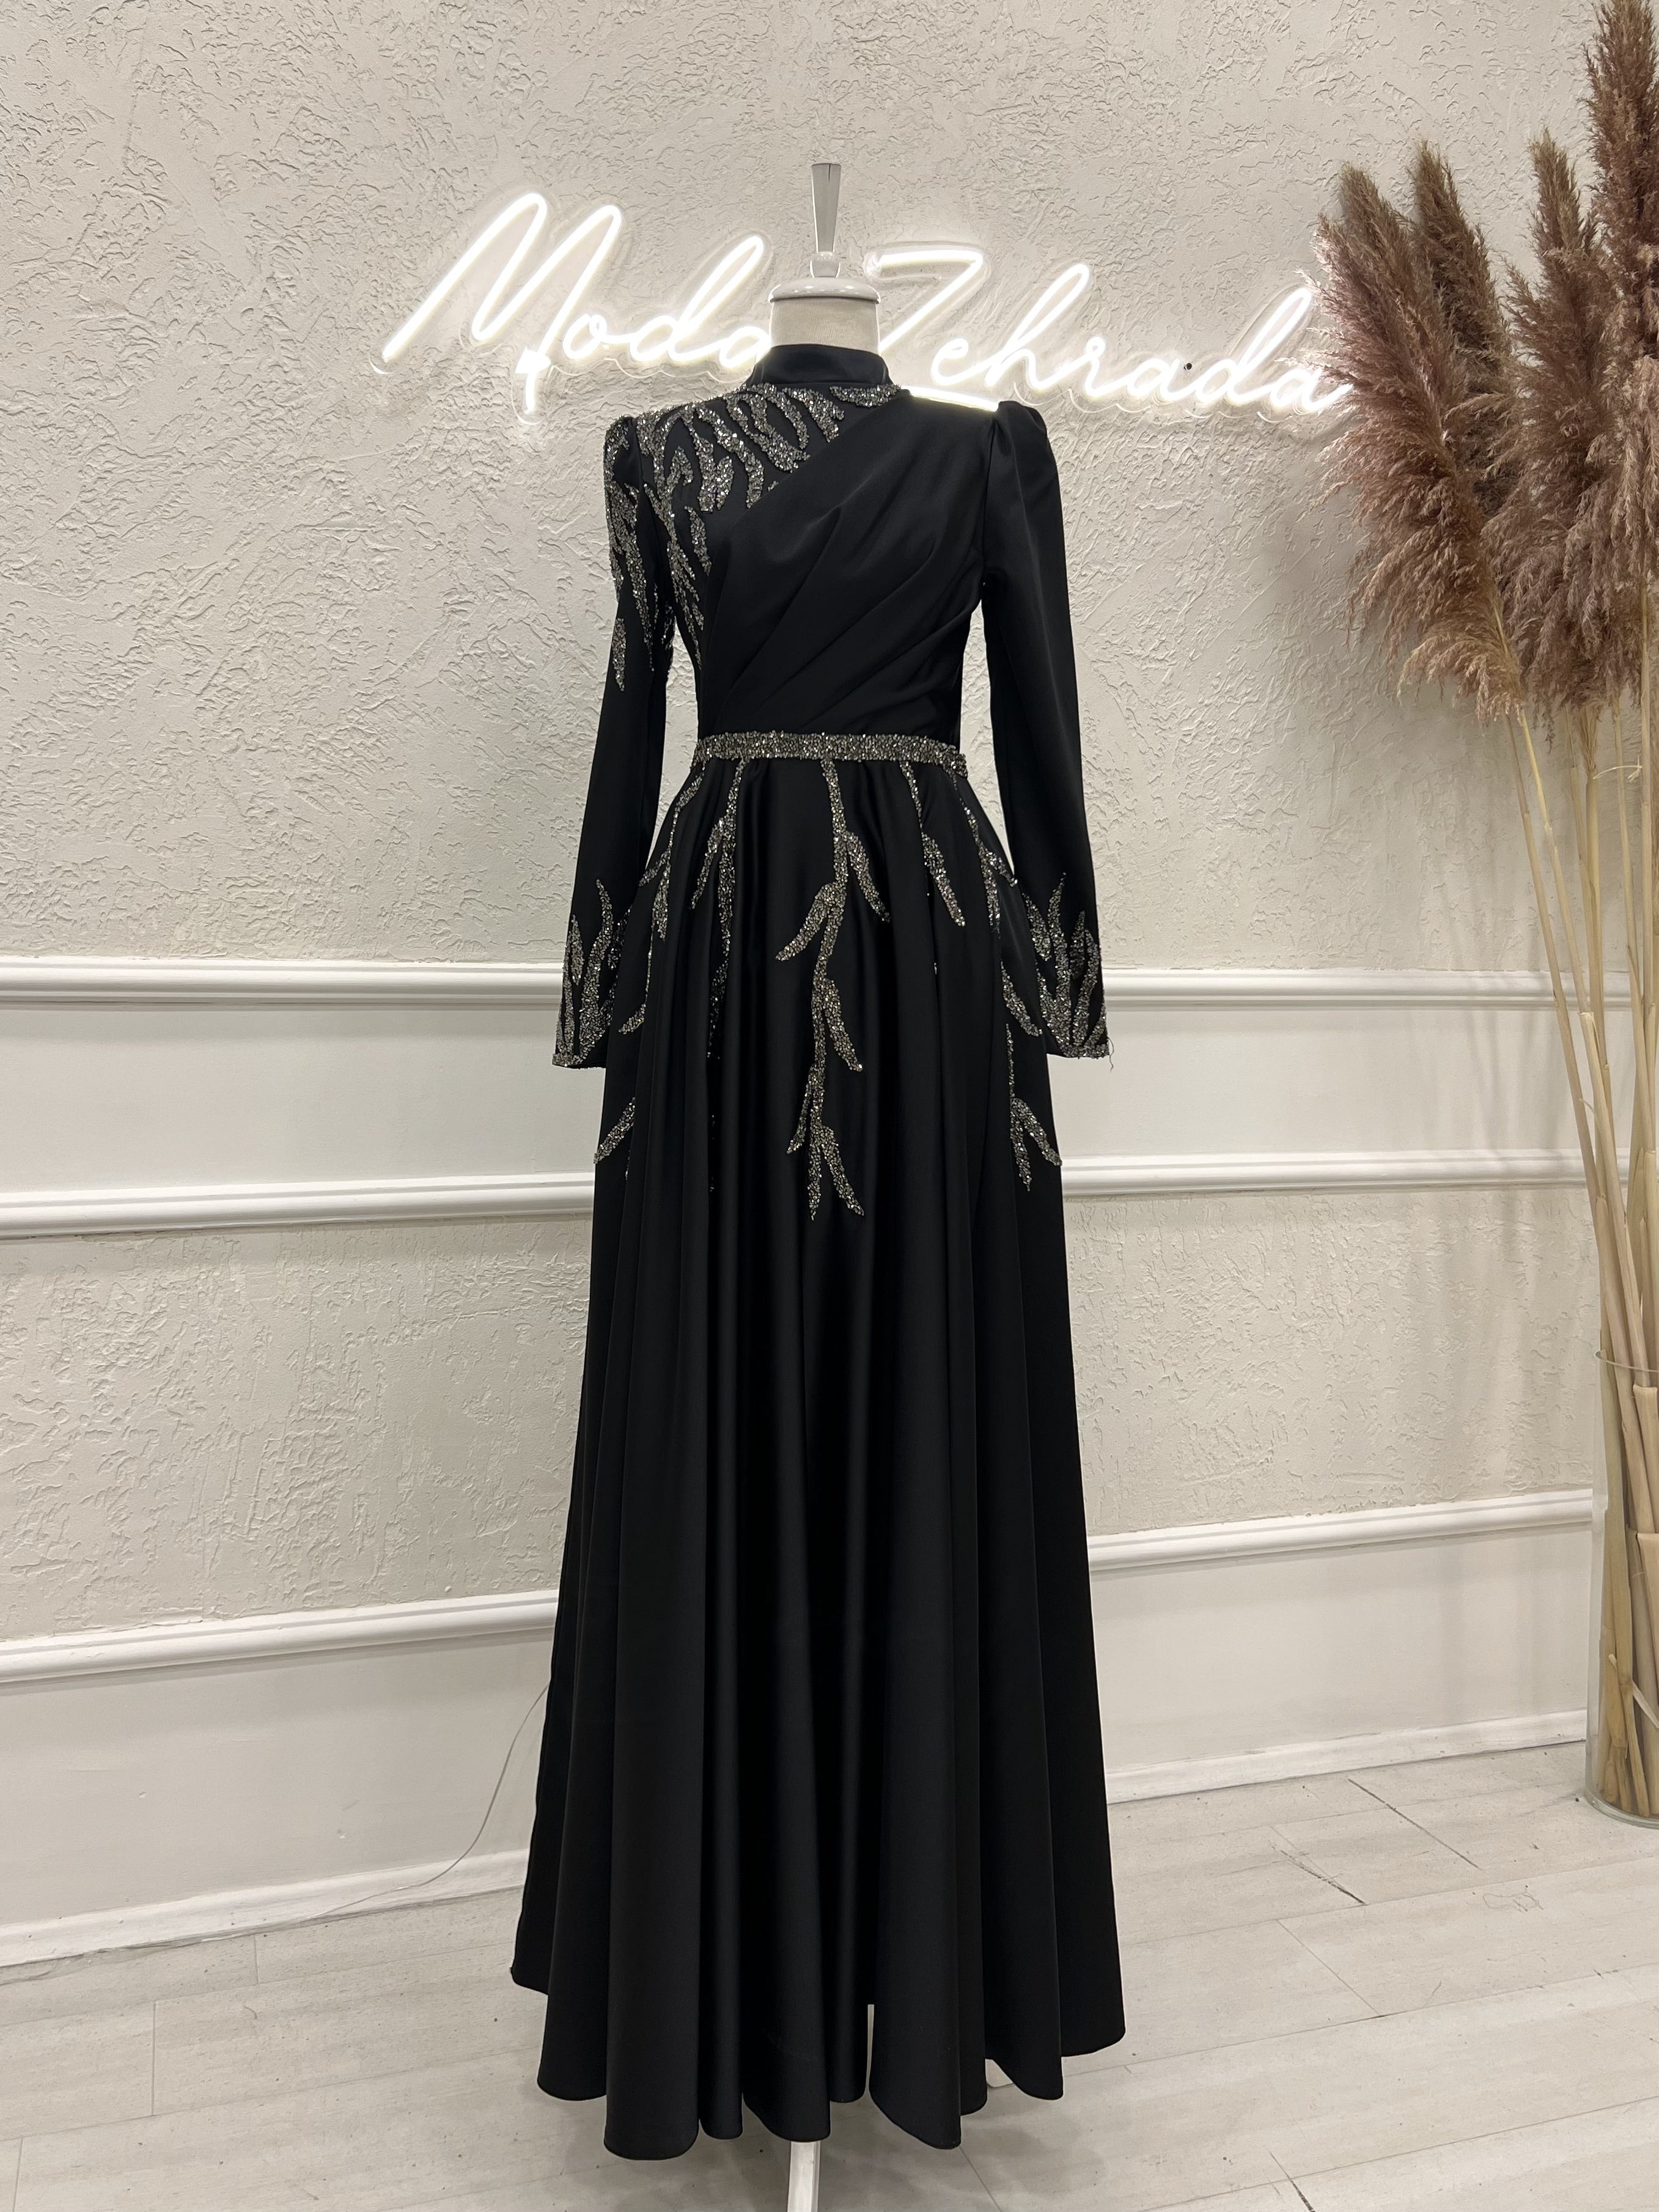 Black Spaghetti Strap Evening Dress Boat Neck Appliques Floor-length Tulle  Formal Party Dresses Female Banquet Gowns - Evening Dresses - AliExpress